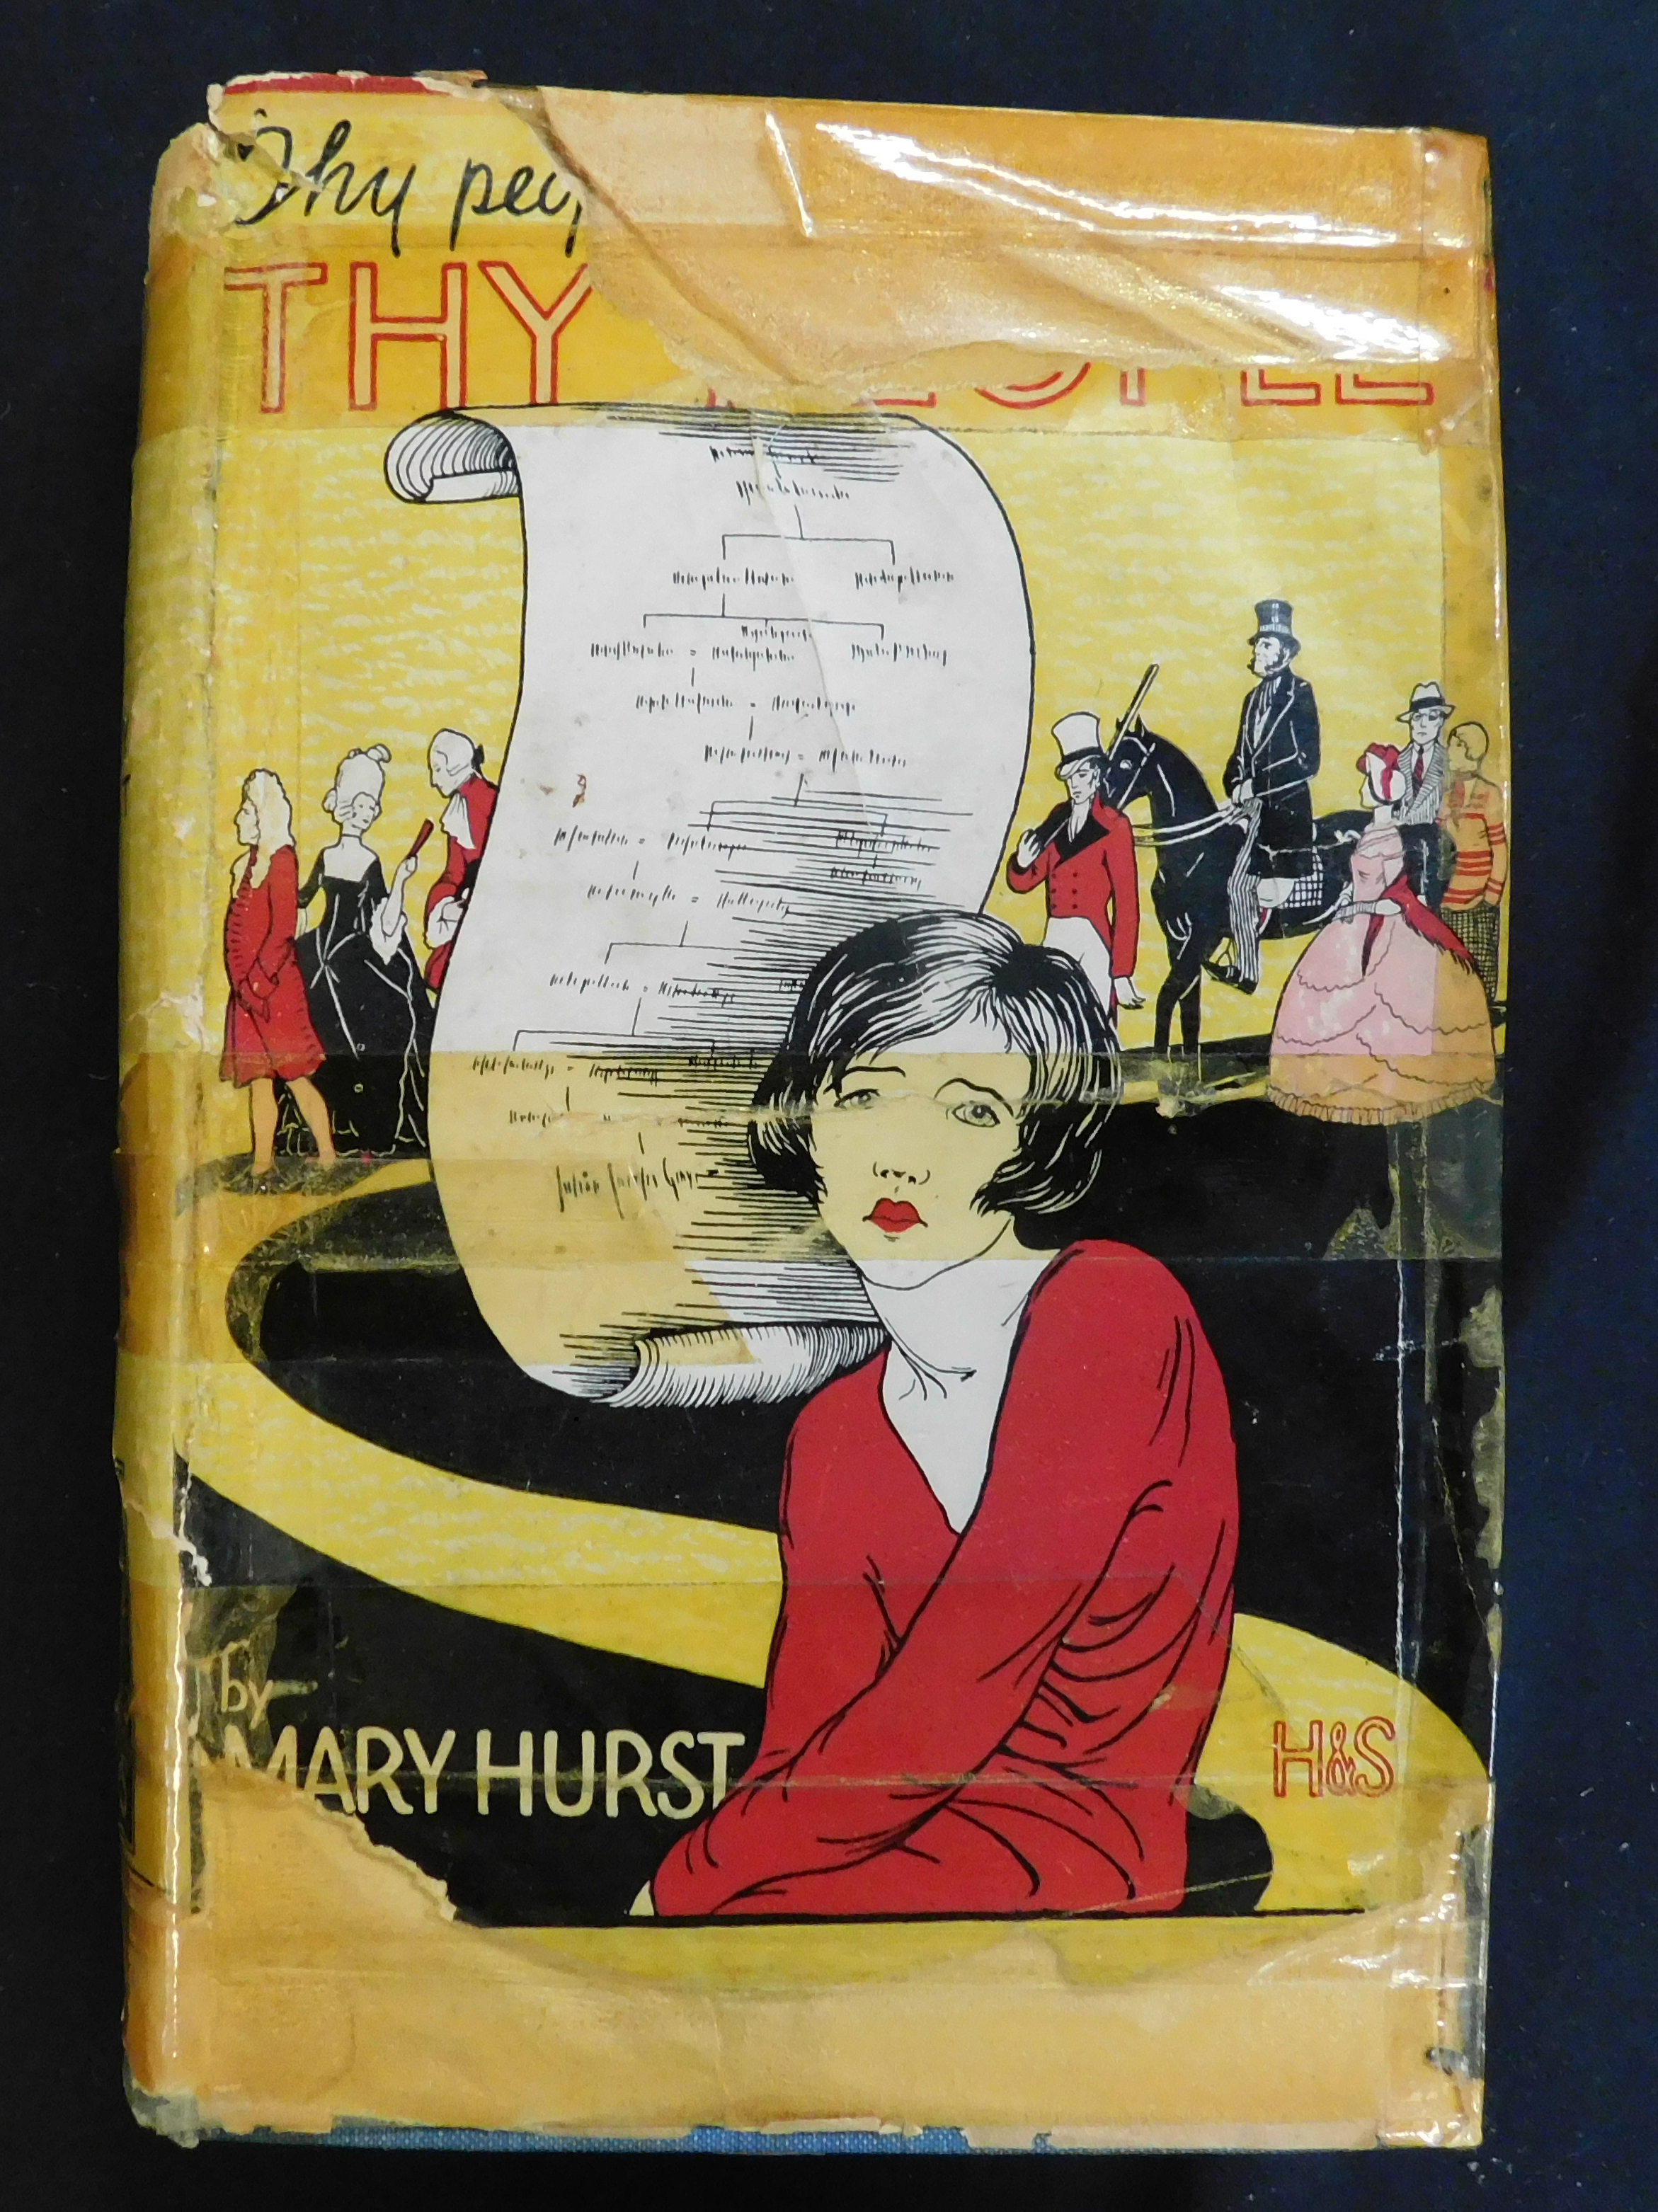 MARY HURST: THY PEOPLE, London, Hodder & Stoughton [1928], 1st edition, 6pp adverts at end, original